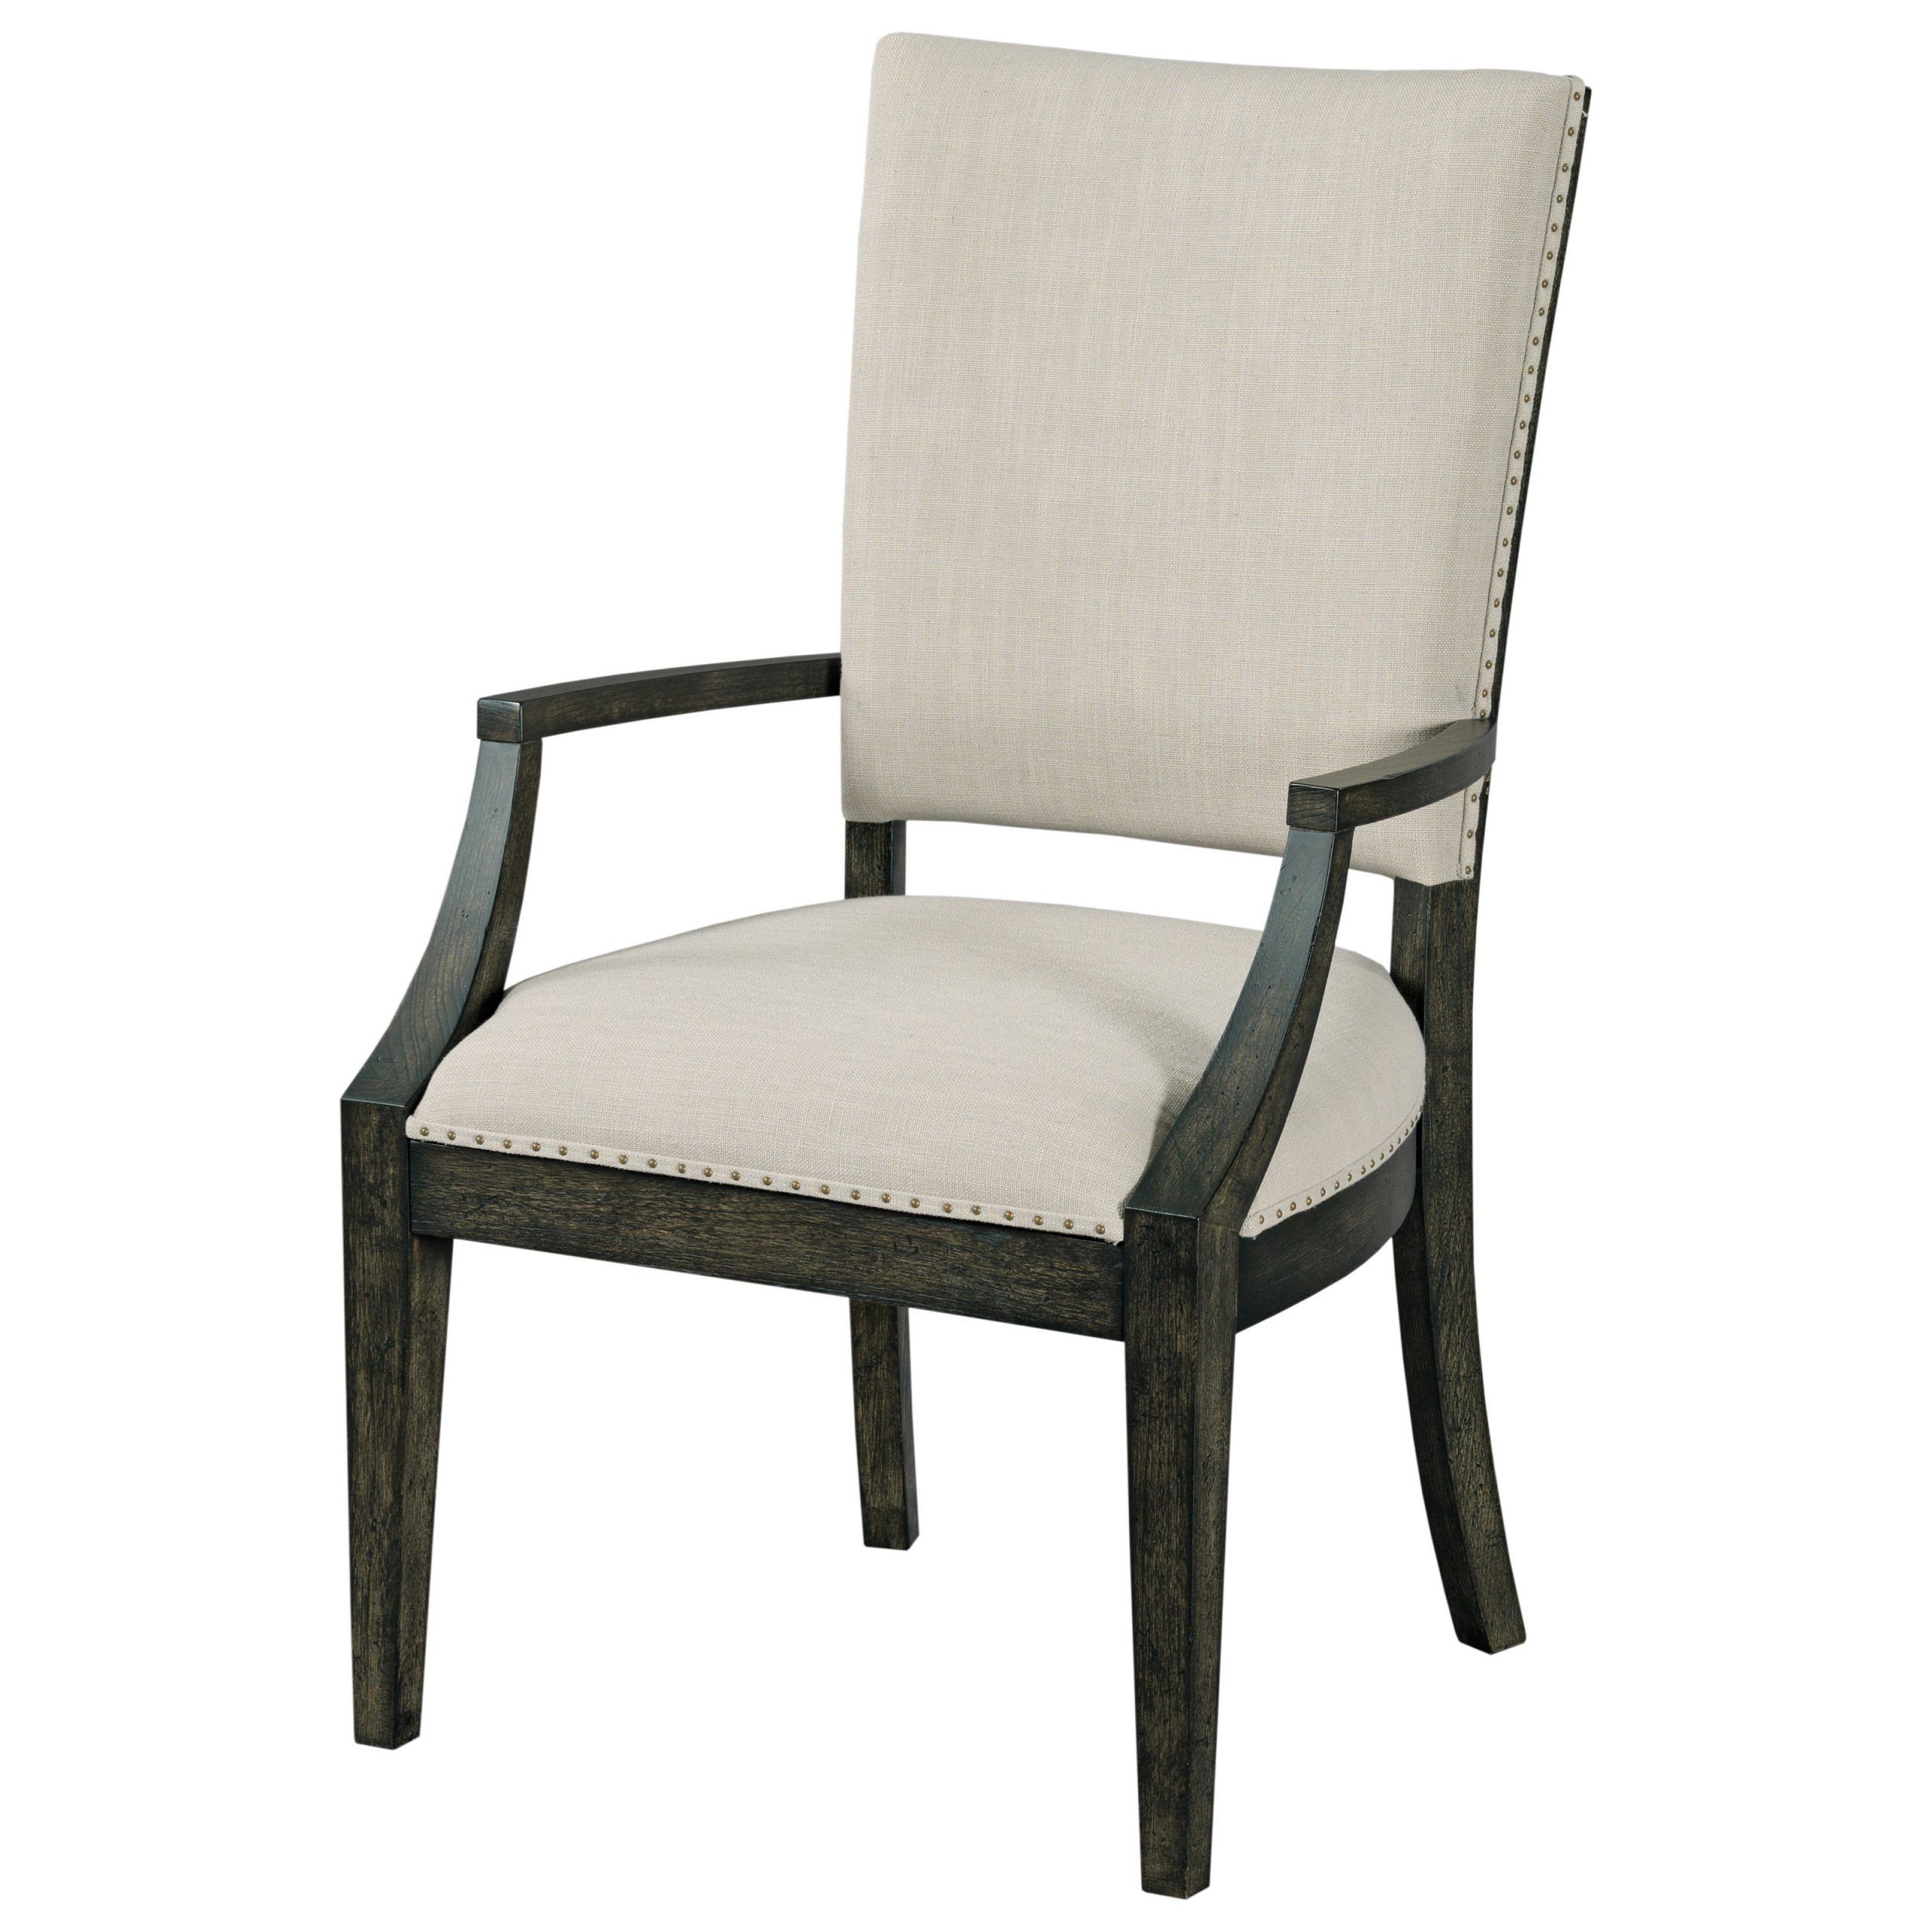 Lakeville Armchairs Throughout Most Popular Kincaid Furniture Plank Road 706 623c Howell Upholstered (View 20 of 20)